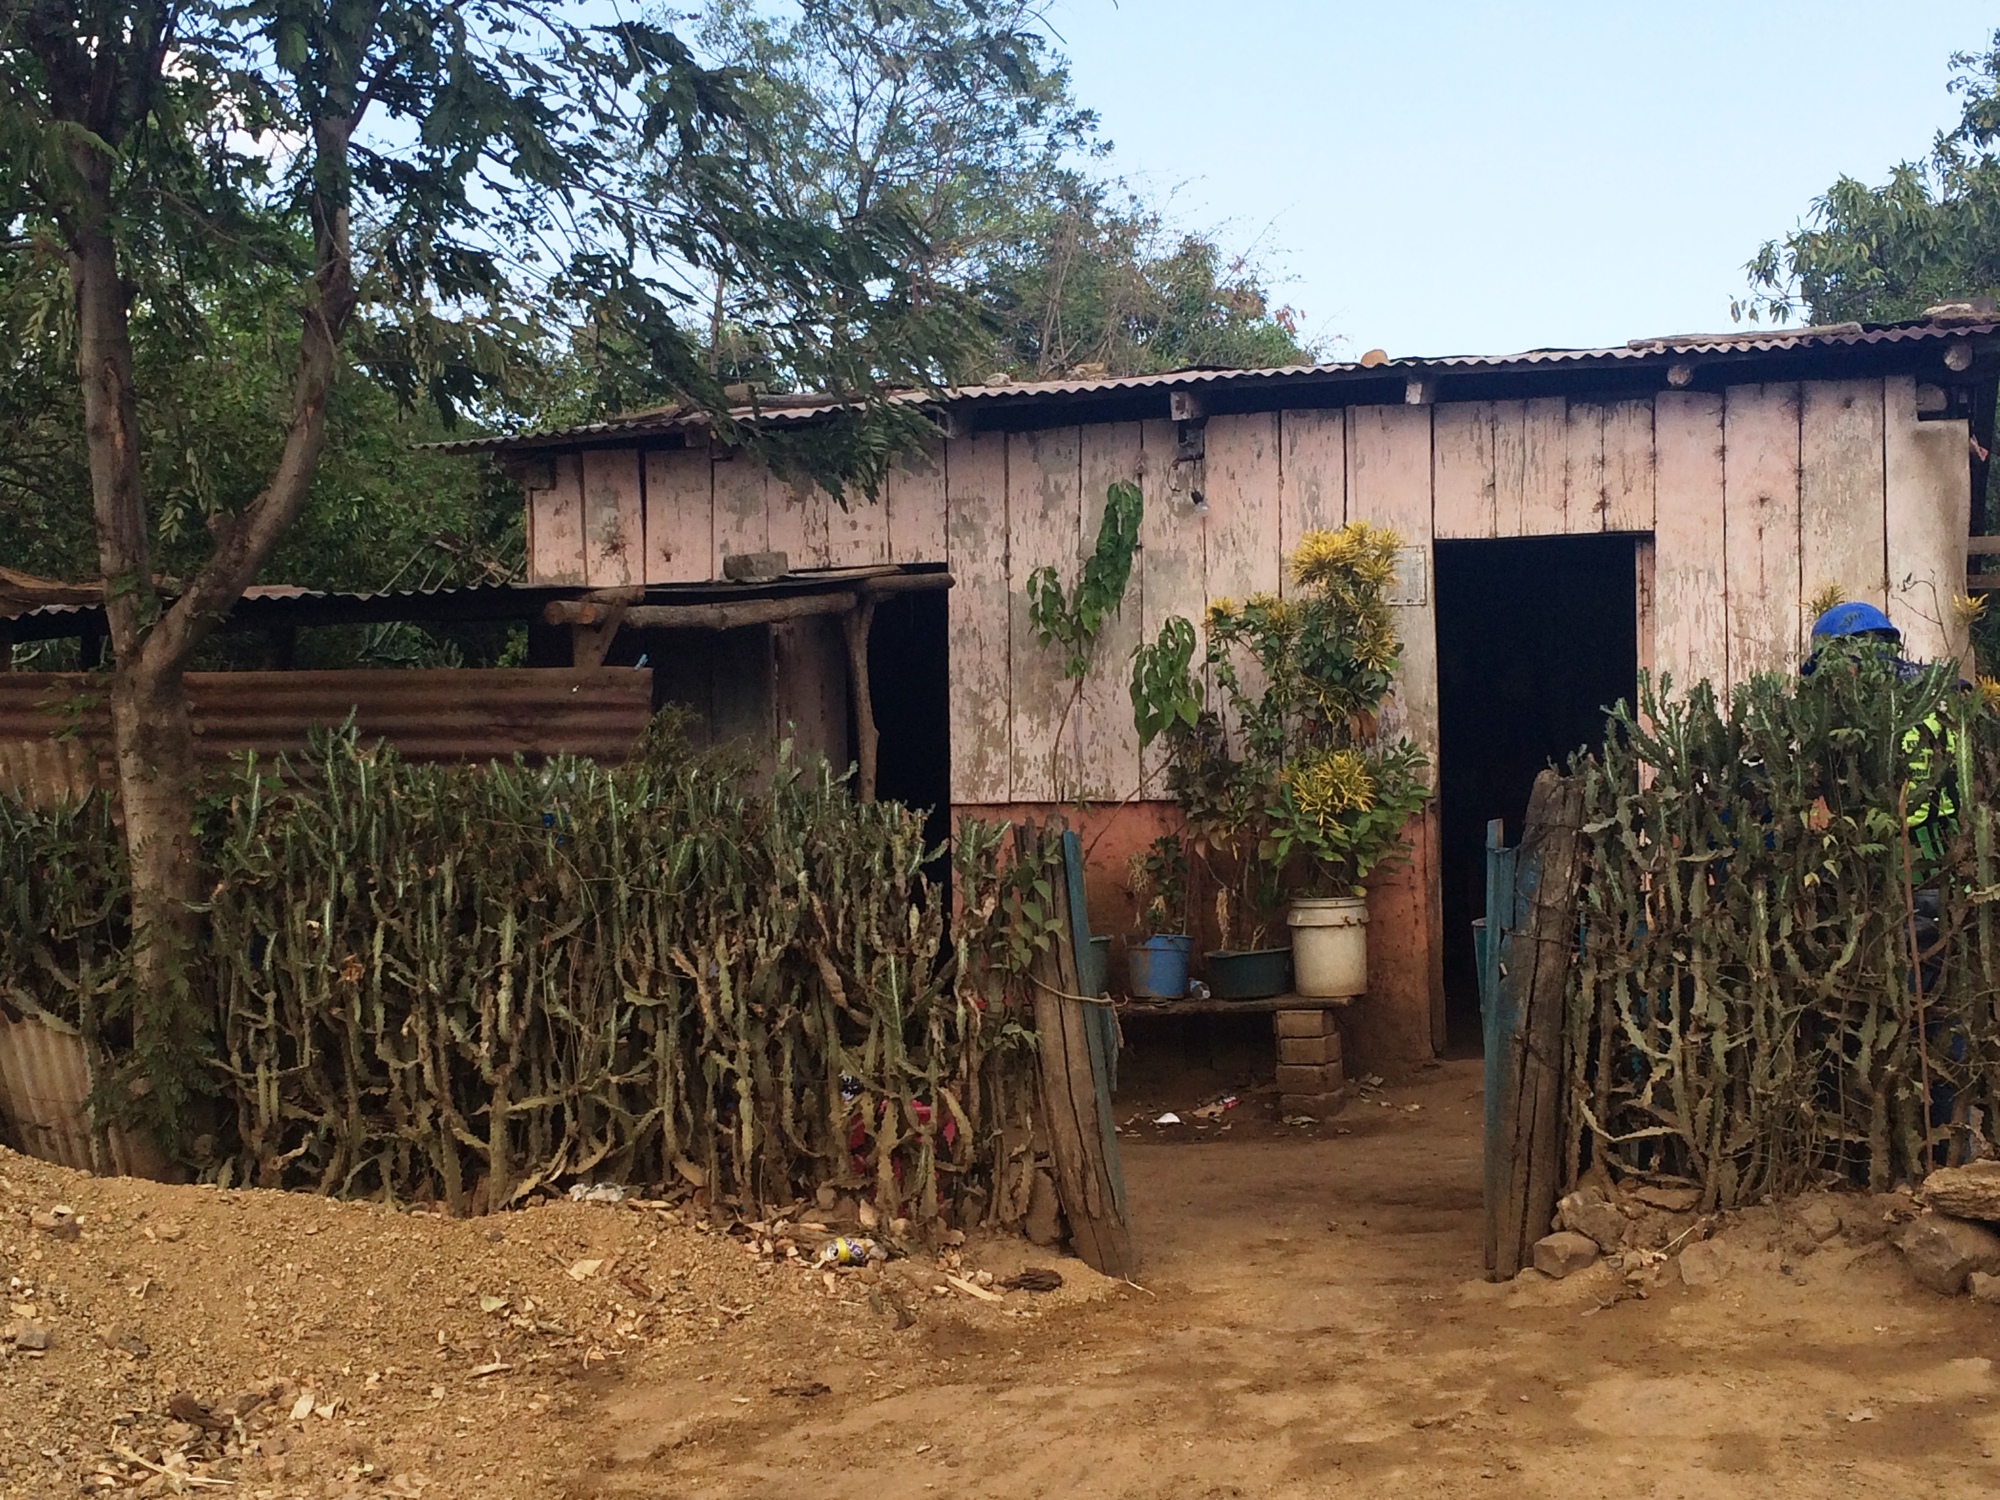 A typical Nicaraguan house is shown.